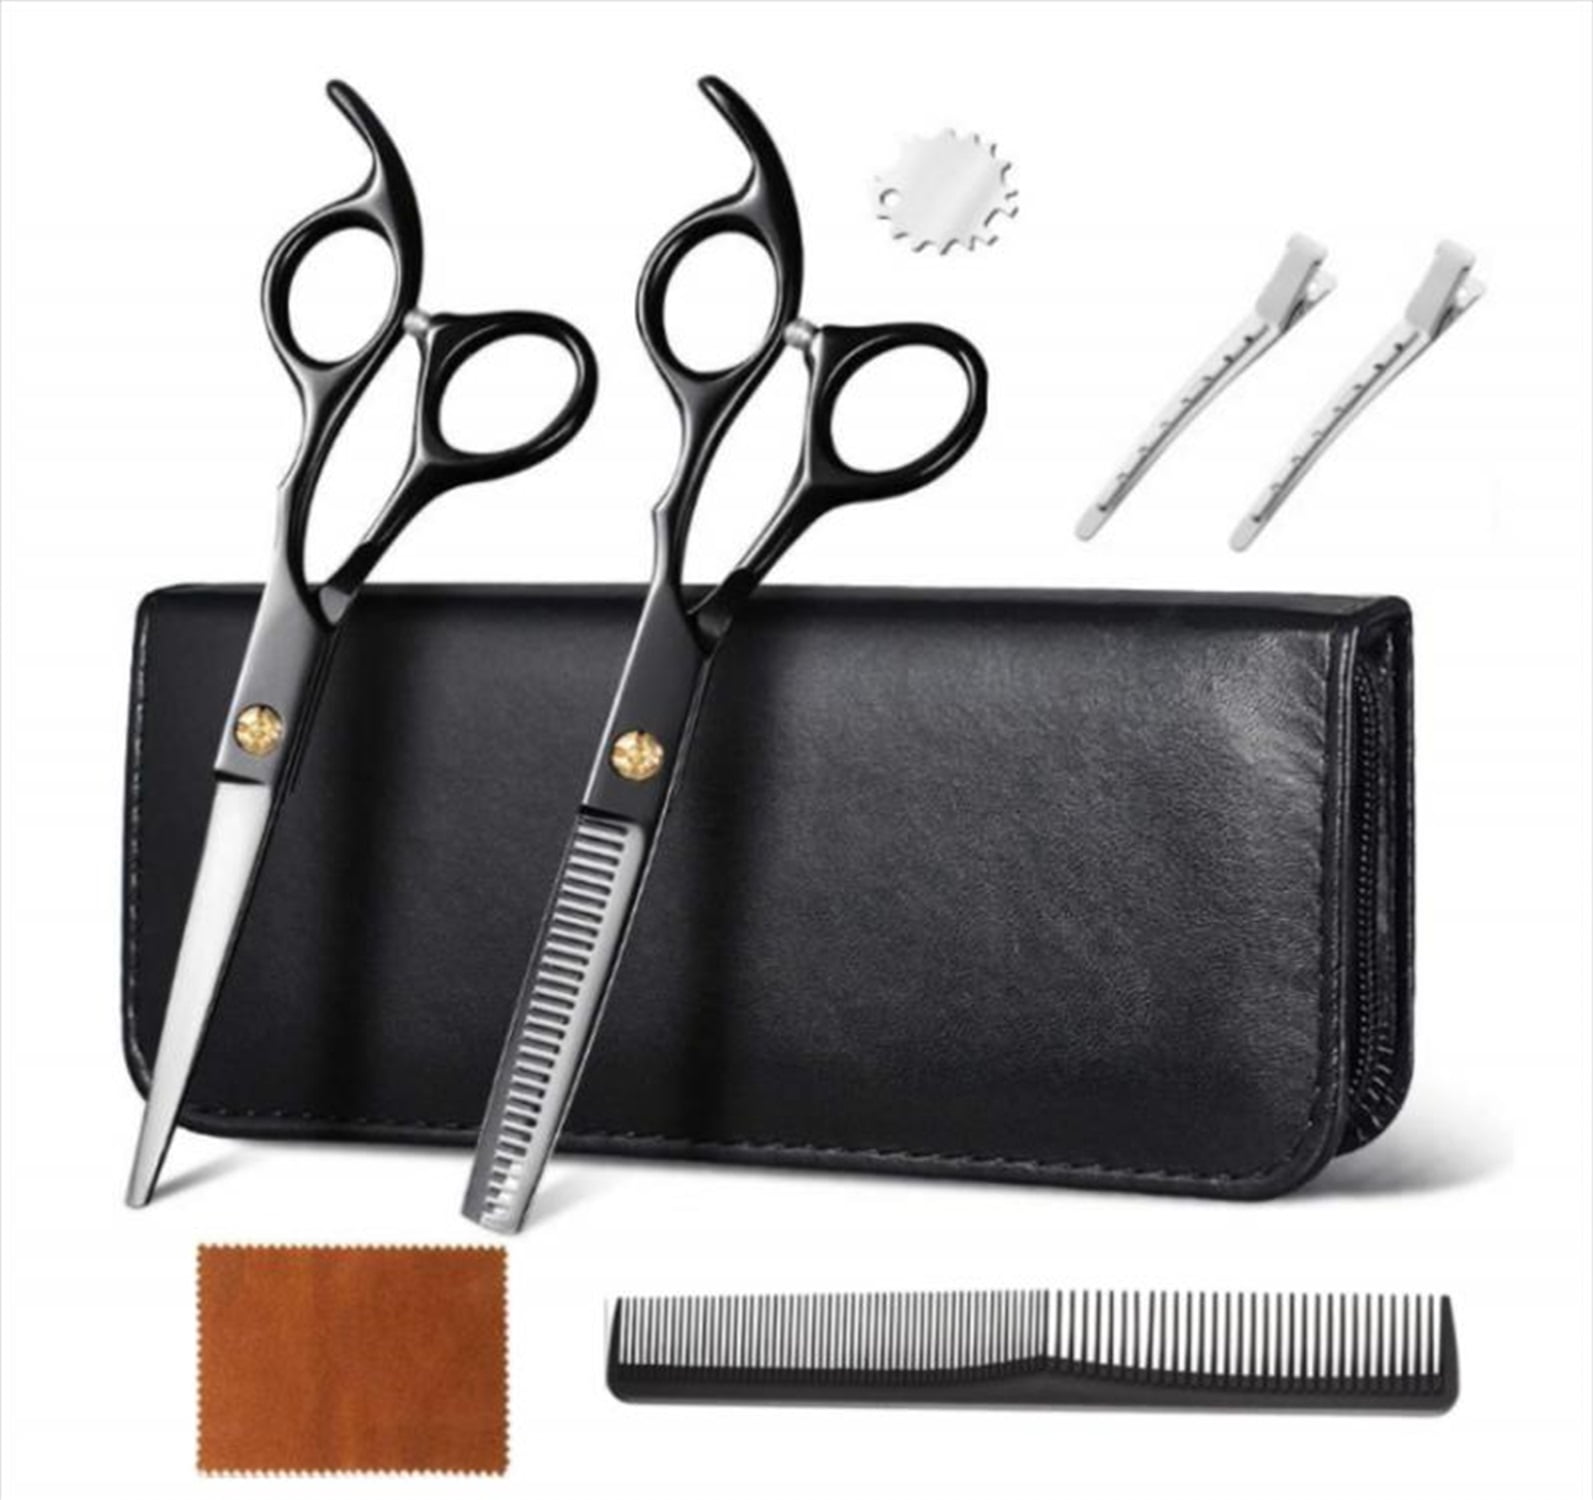 Hair Cutting Scissors Thinning Shears- Fcysy Professional Barber Sharp Hair  Scissors Hairdressing Shears Kit with Haircut Accessories in Leather Case